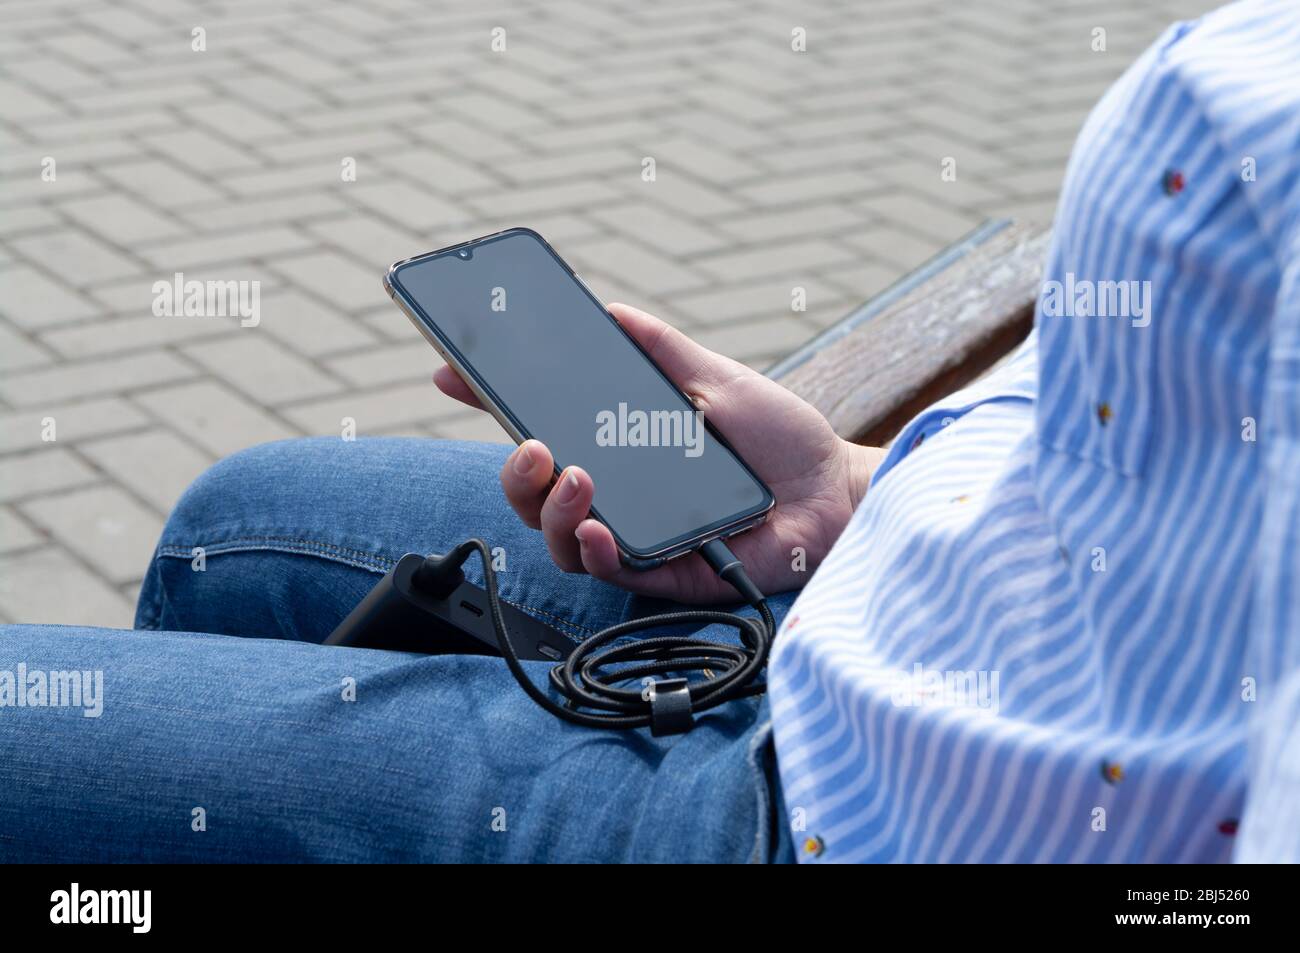 Girl on the bench uses phone while charging from the power bank. Modern technology concept. Selective focus Stock Photo